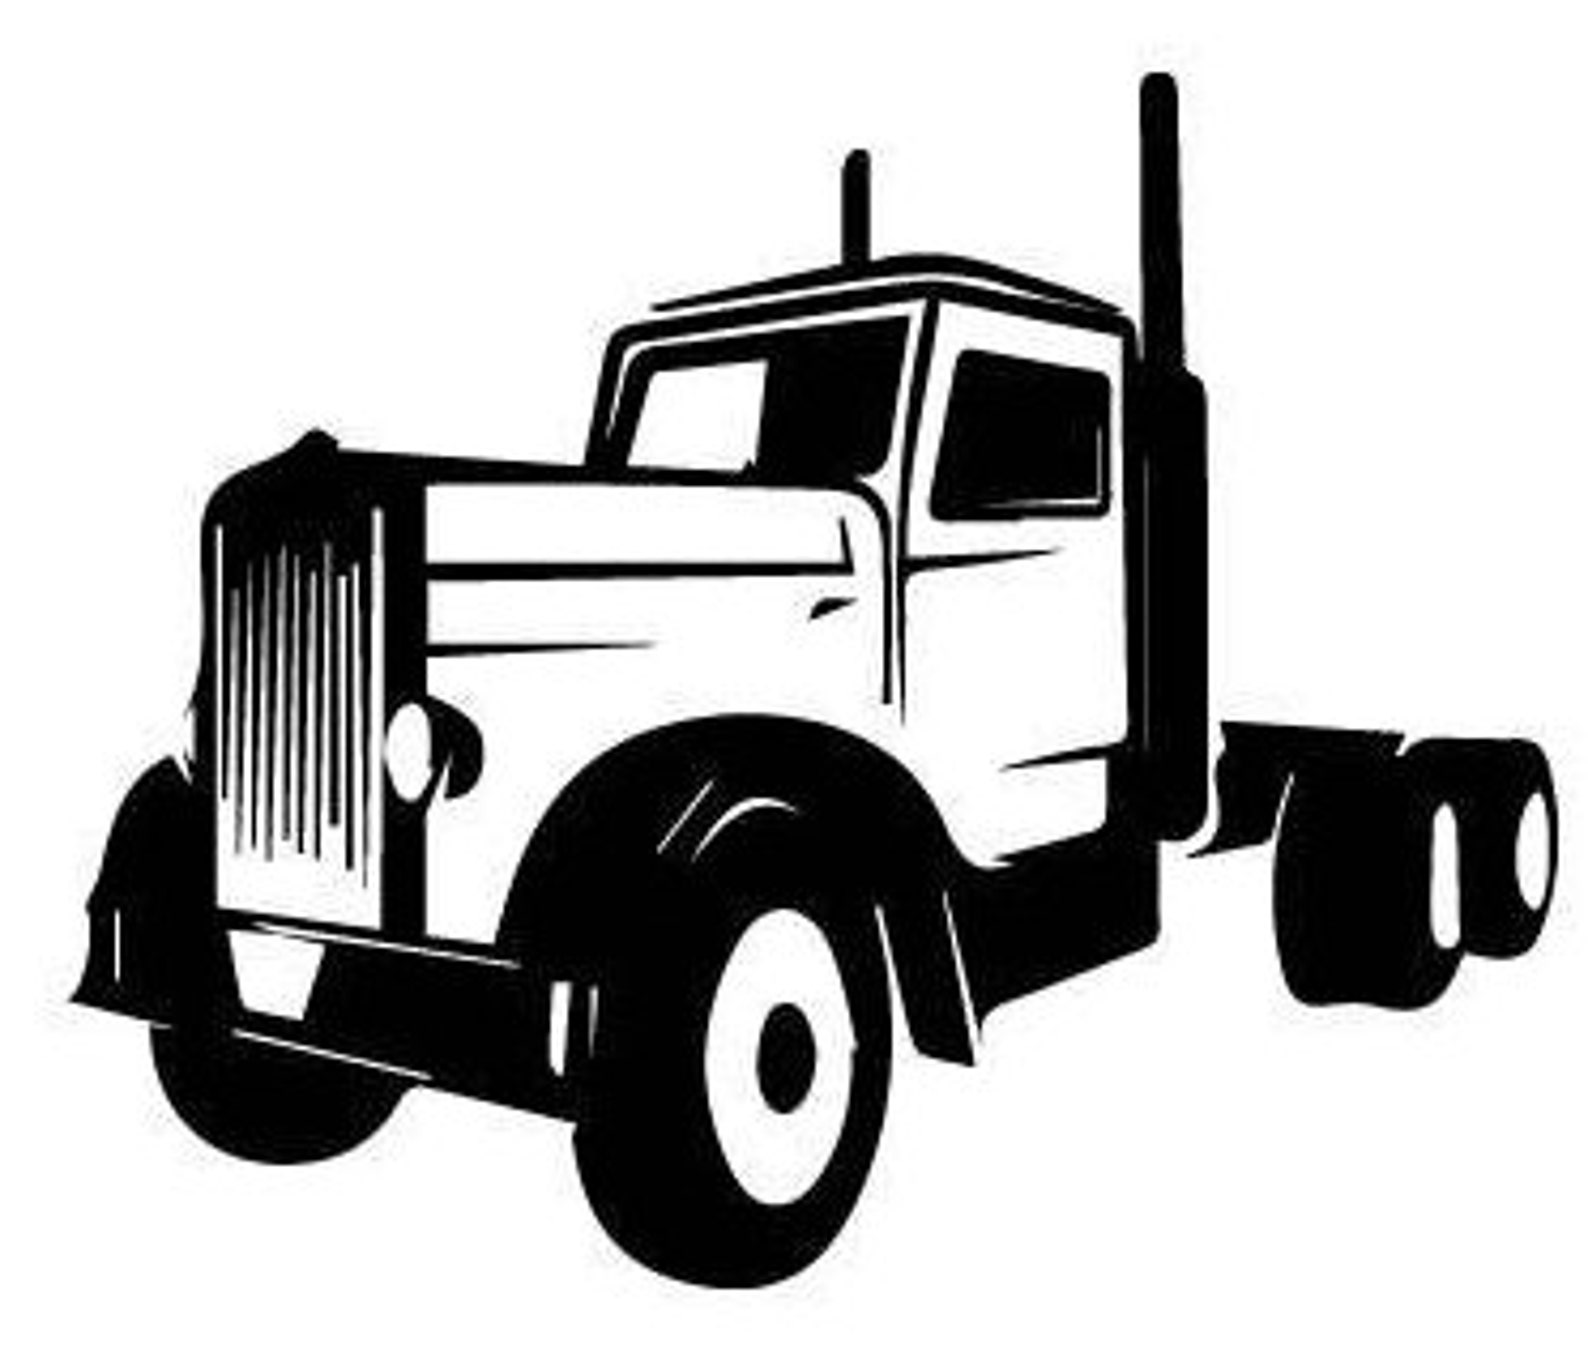 SEMI TRUCK Tractor Trailer outline laptop cup decal SVG image 0.